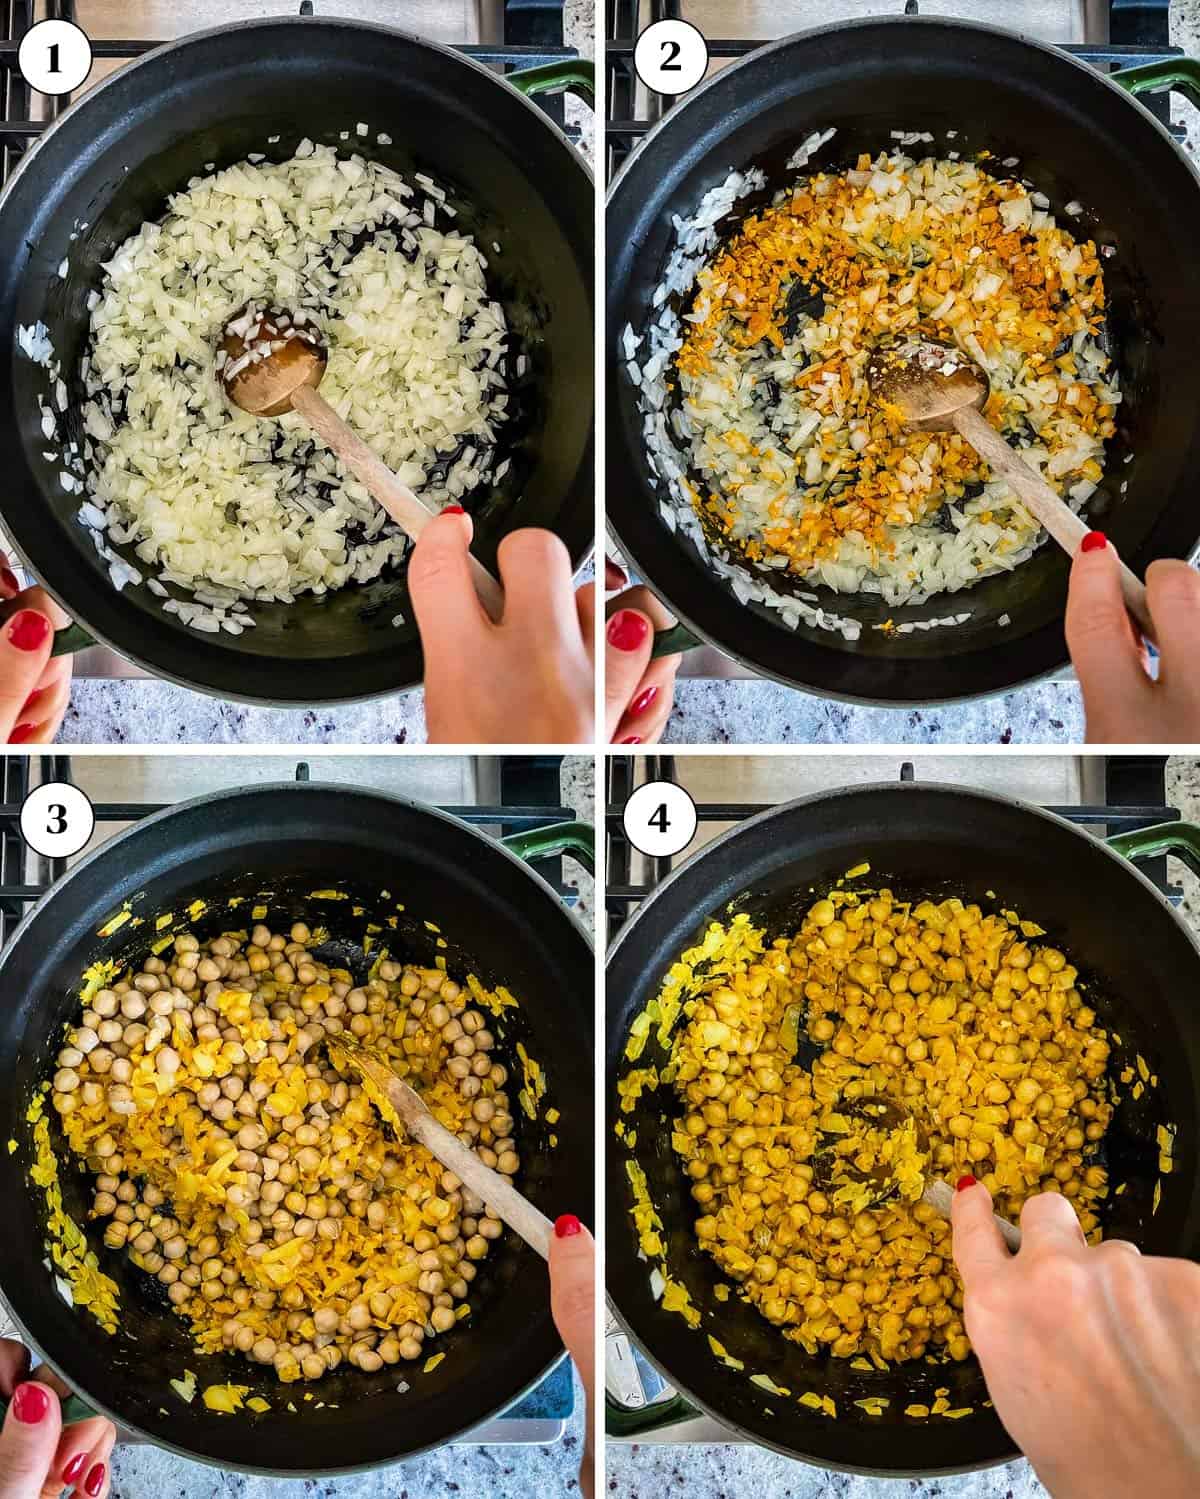 A collage of images showing how to sauté onions and crush spiced chickpeas with a wooden spoon.